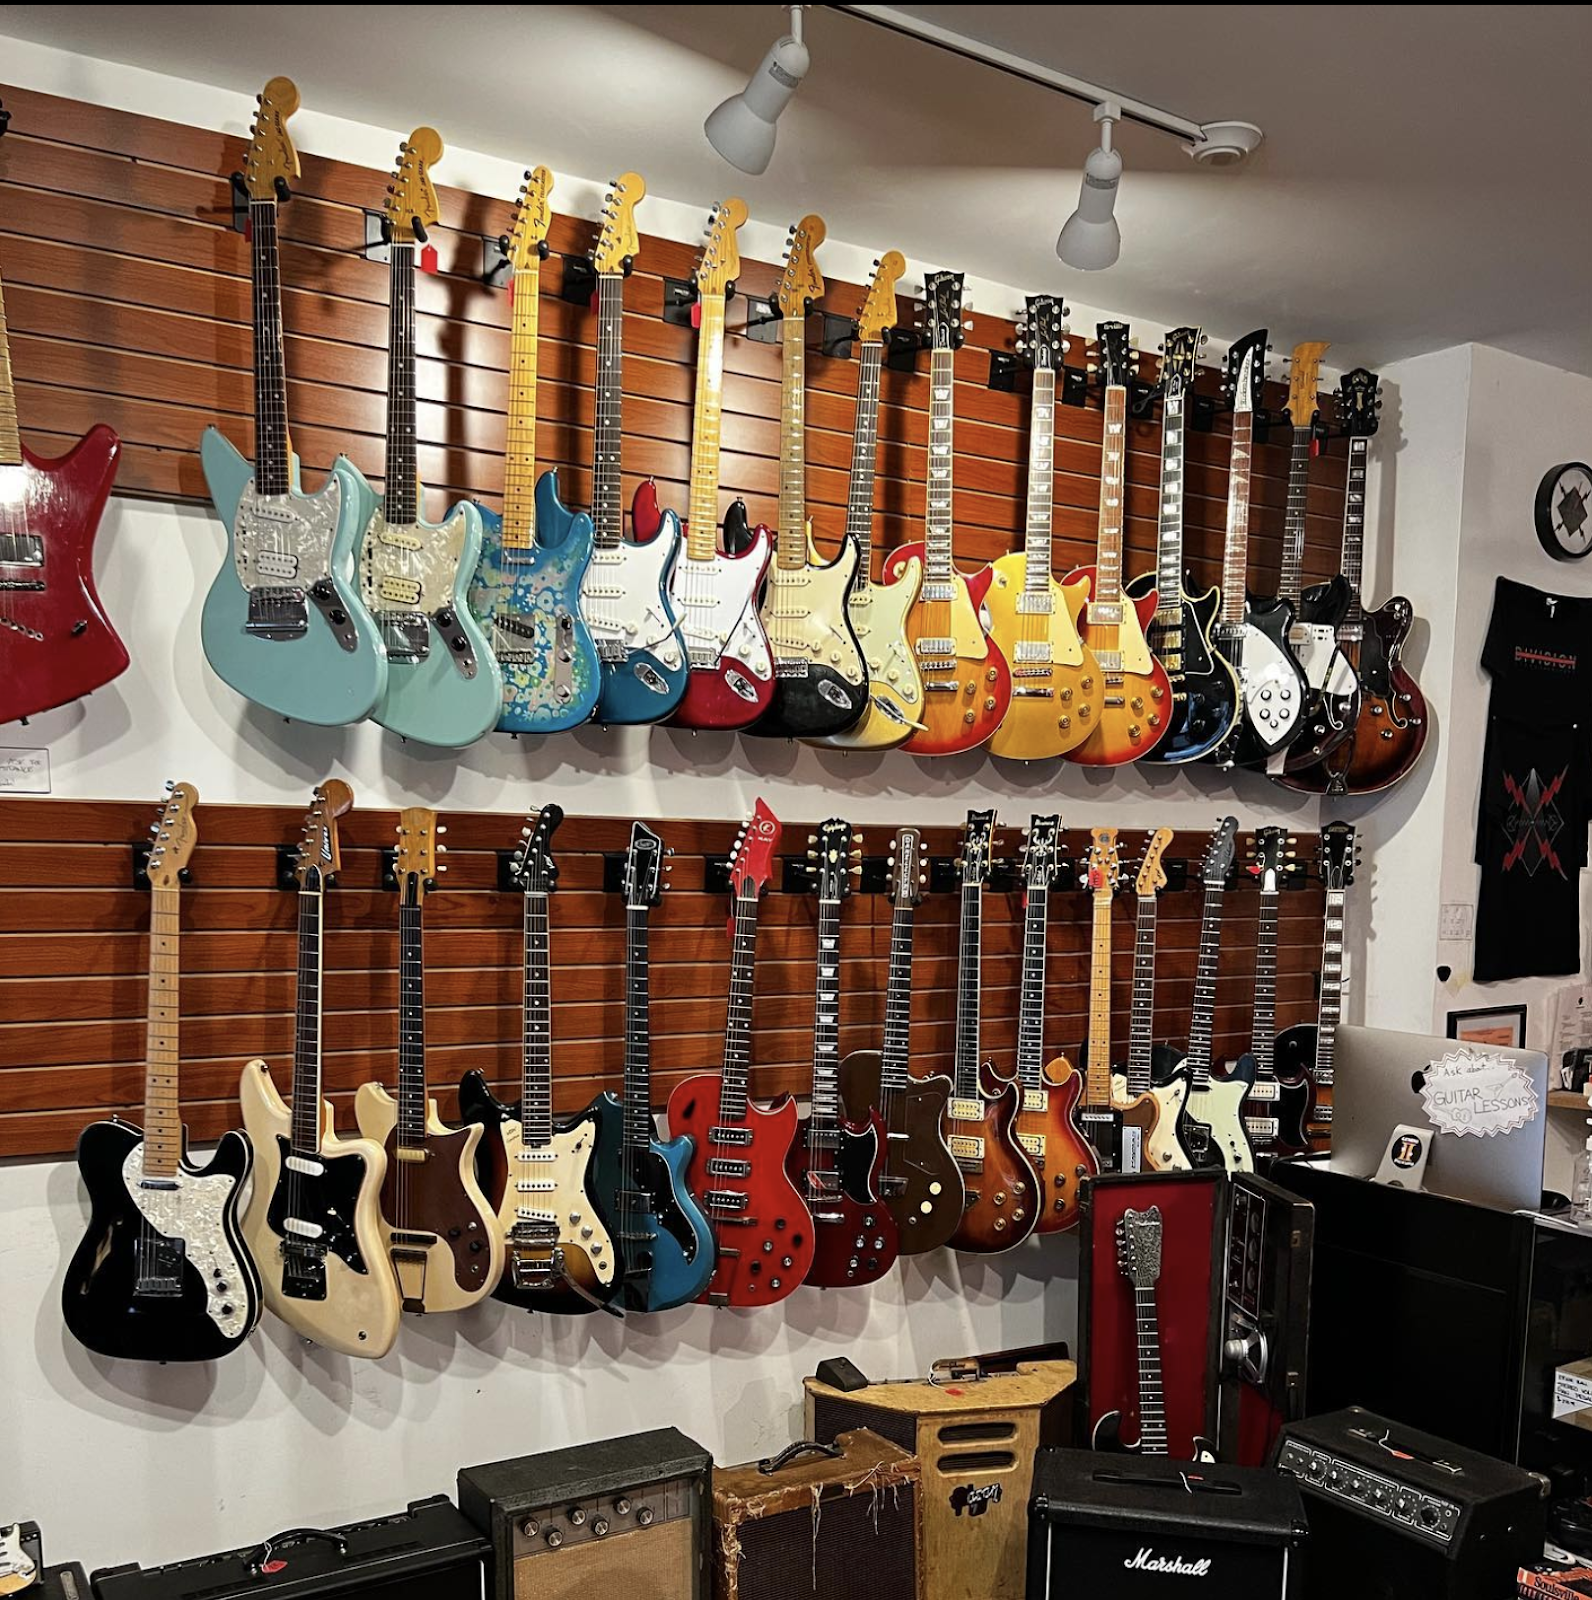 Owner Paul DeCourcey keeps Division Street Guitars stocked with anywhere from 75-100 used guitars at any given time